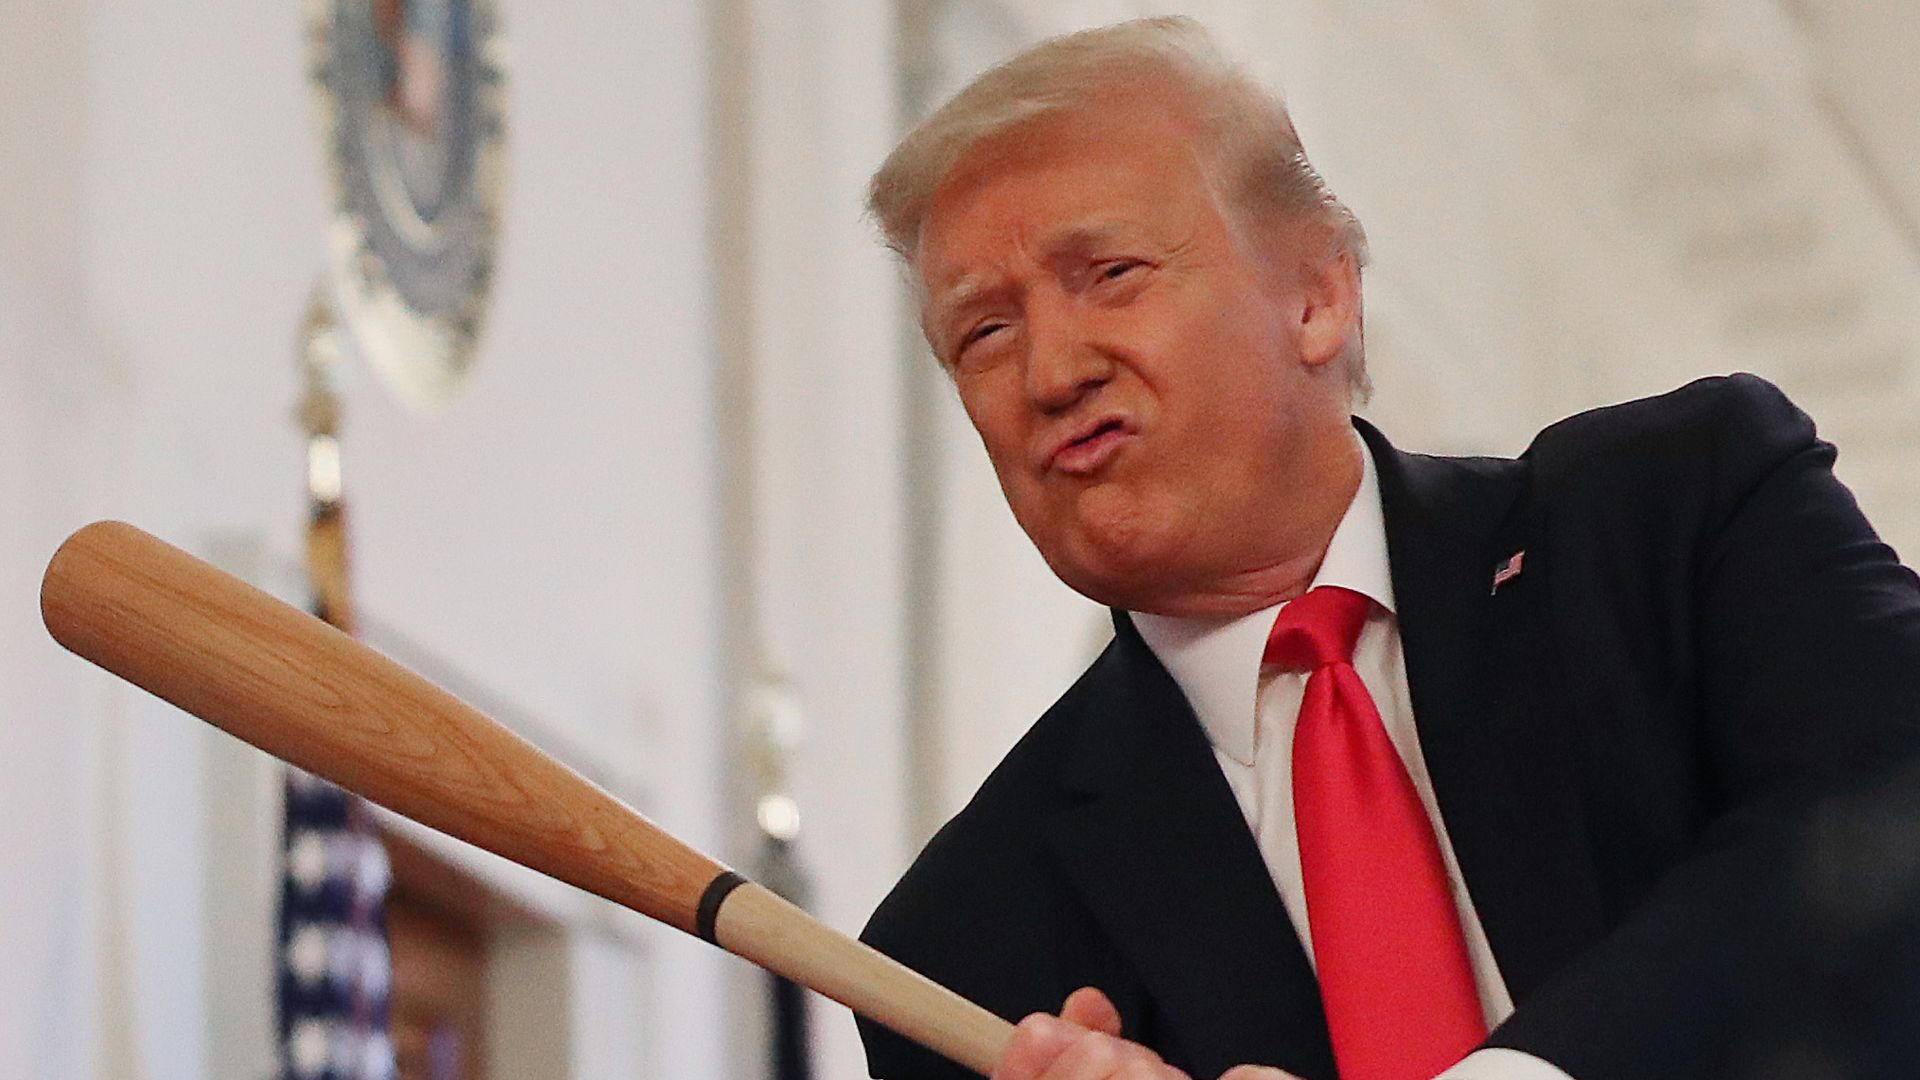 President Donald Trump holds a baseball bat while looking at exhibits during a Spirit of America Showcase in the Entrance Hall of the White House July 02, 2020